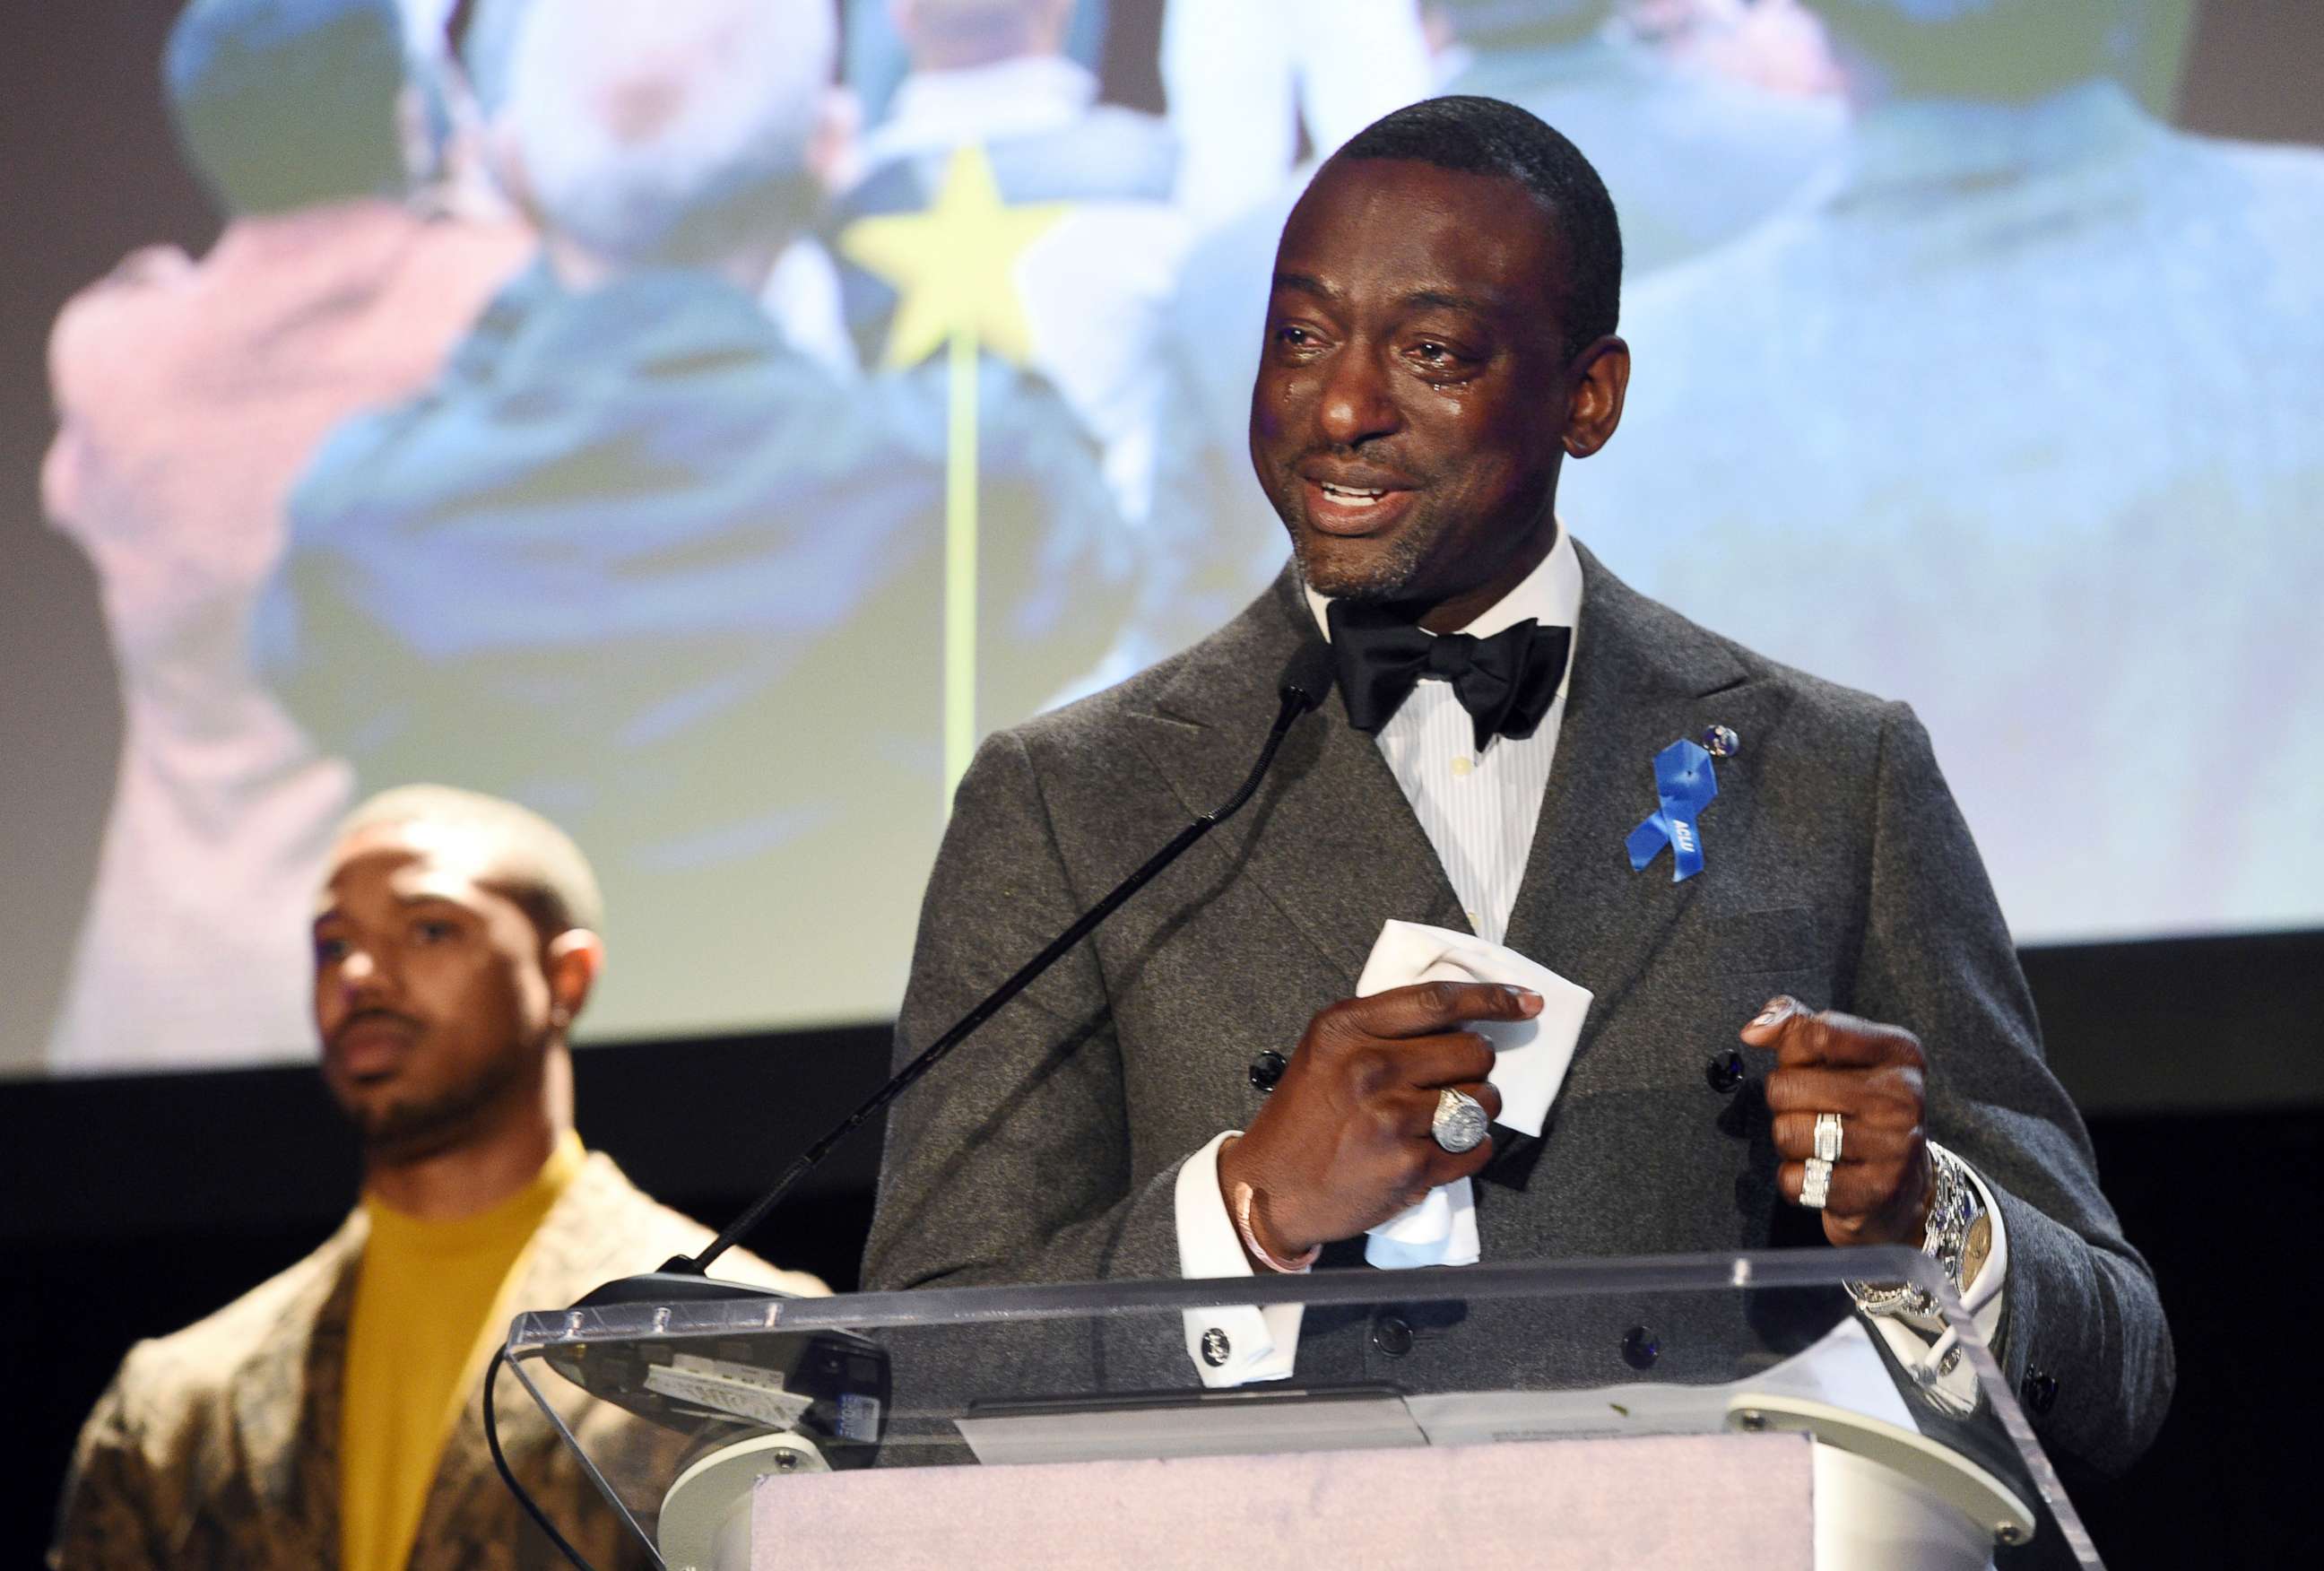 PHOTO: Yusef Salaam, right, addresses the audience as presenter Michael B. Jordan looks on during the ACLU SoCal's 25th Annual Luncheon on Friday, June 7, 2019, in Los Angeles.